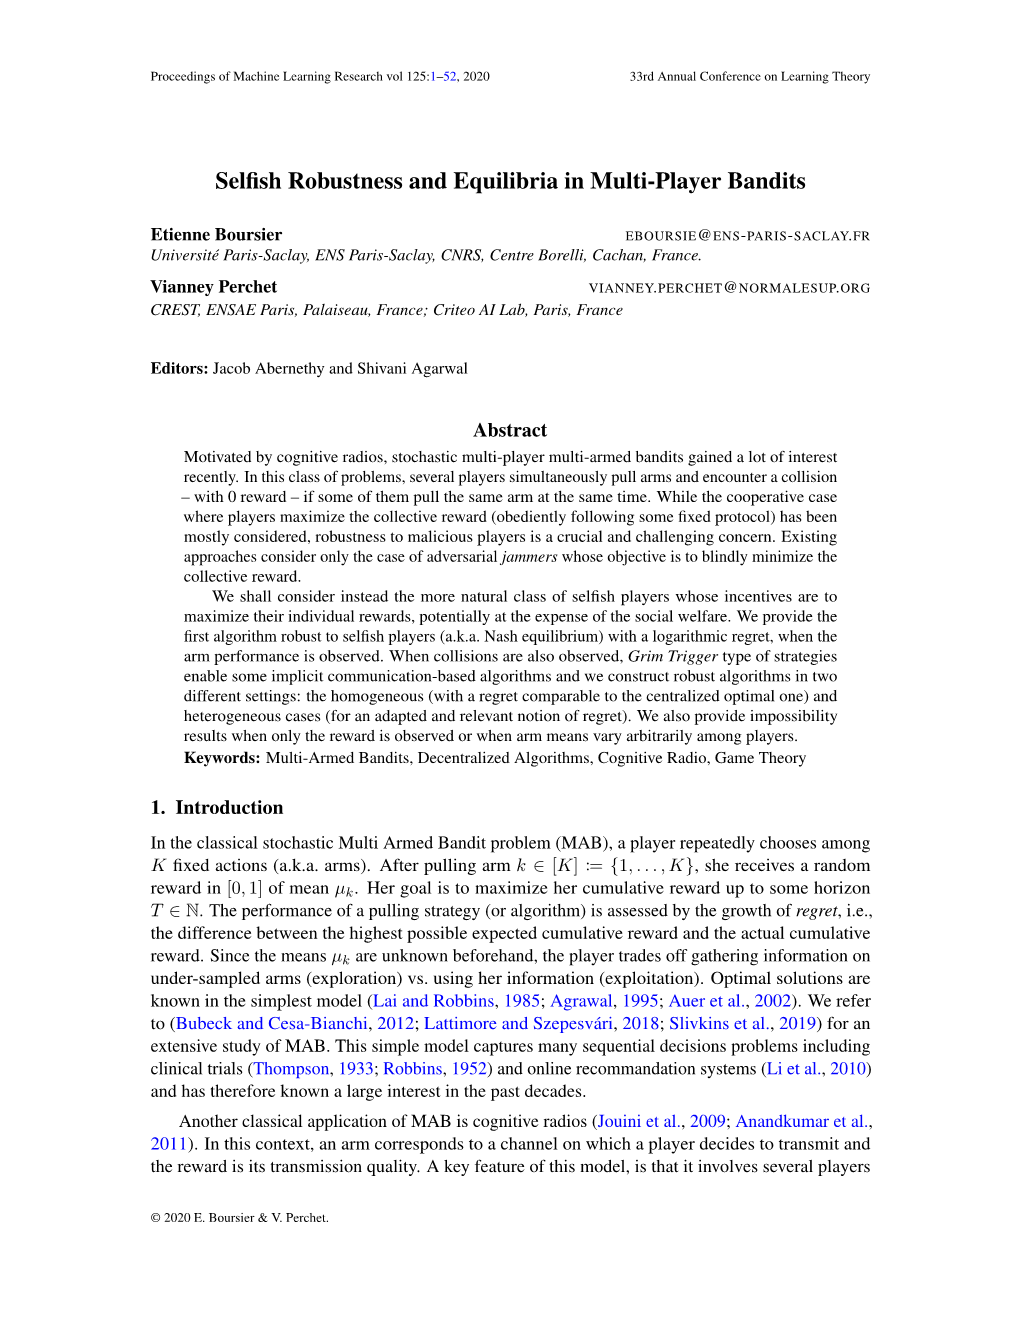 Selfish Robustness and Equilibria in Multi-Player Bandits